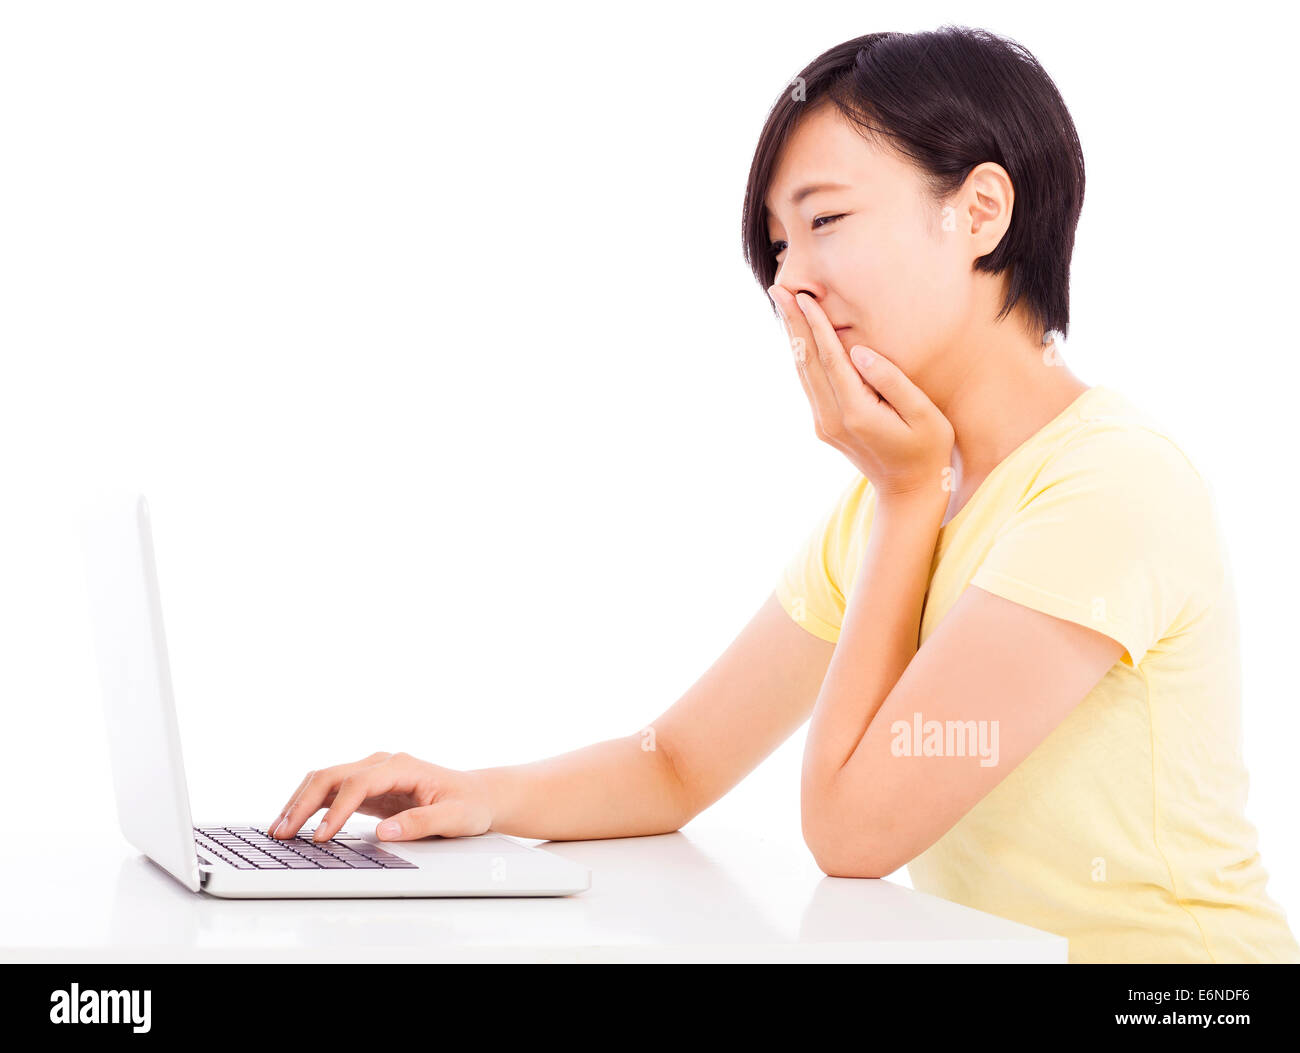 crying woman in front of a laptop, isolated on white background Stock Photo